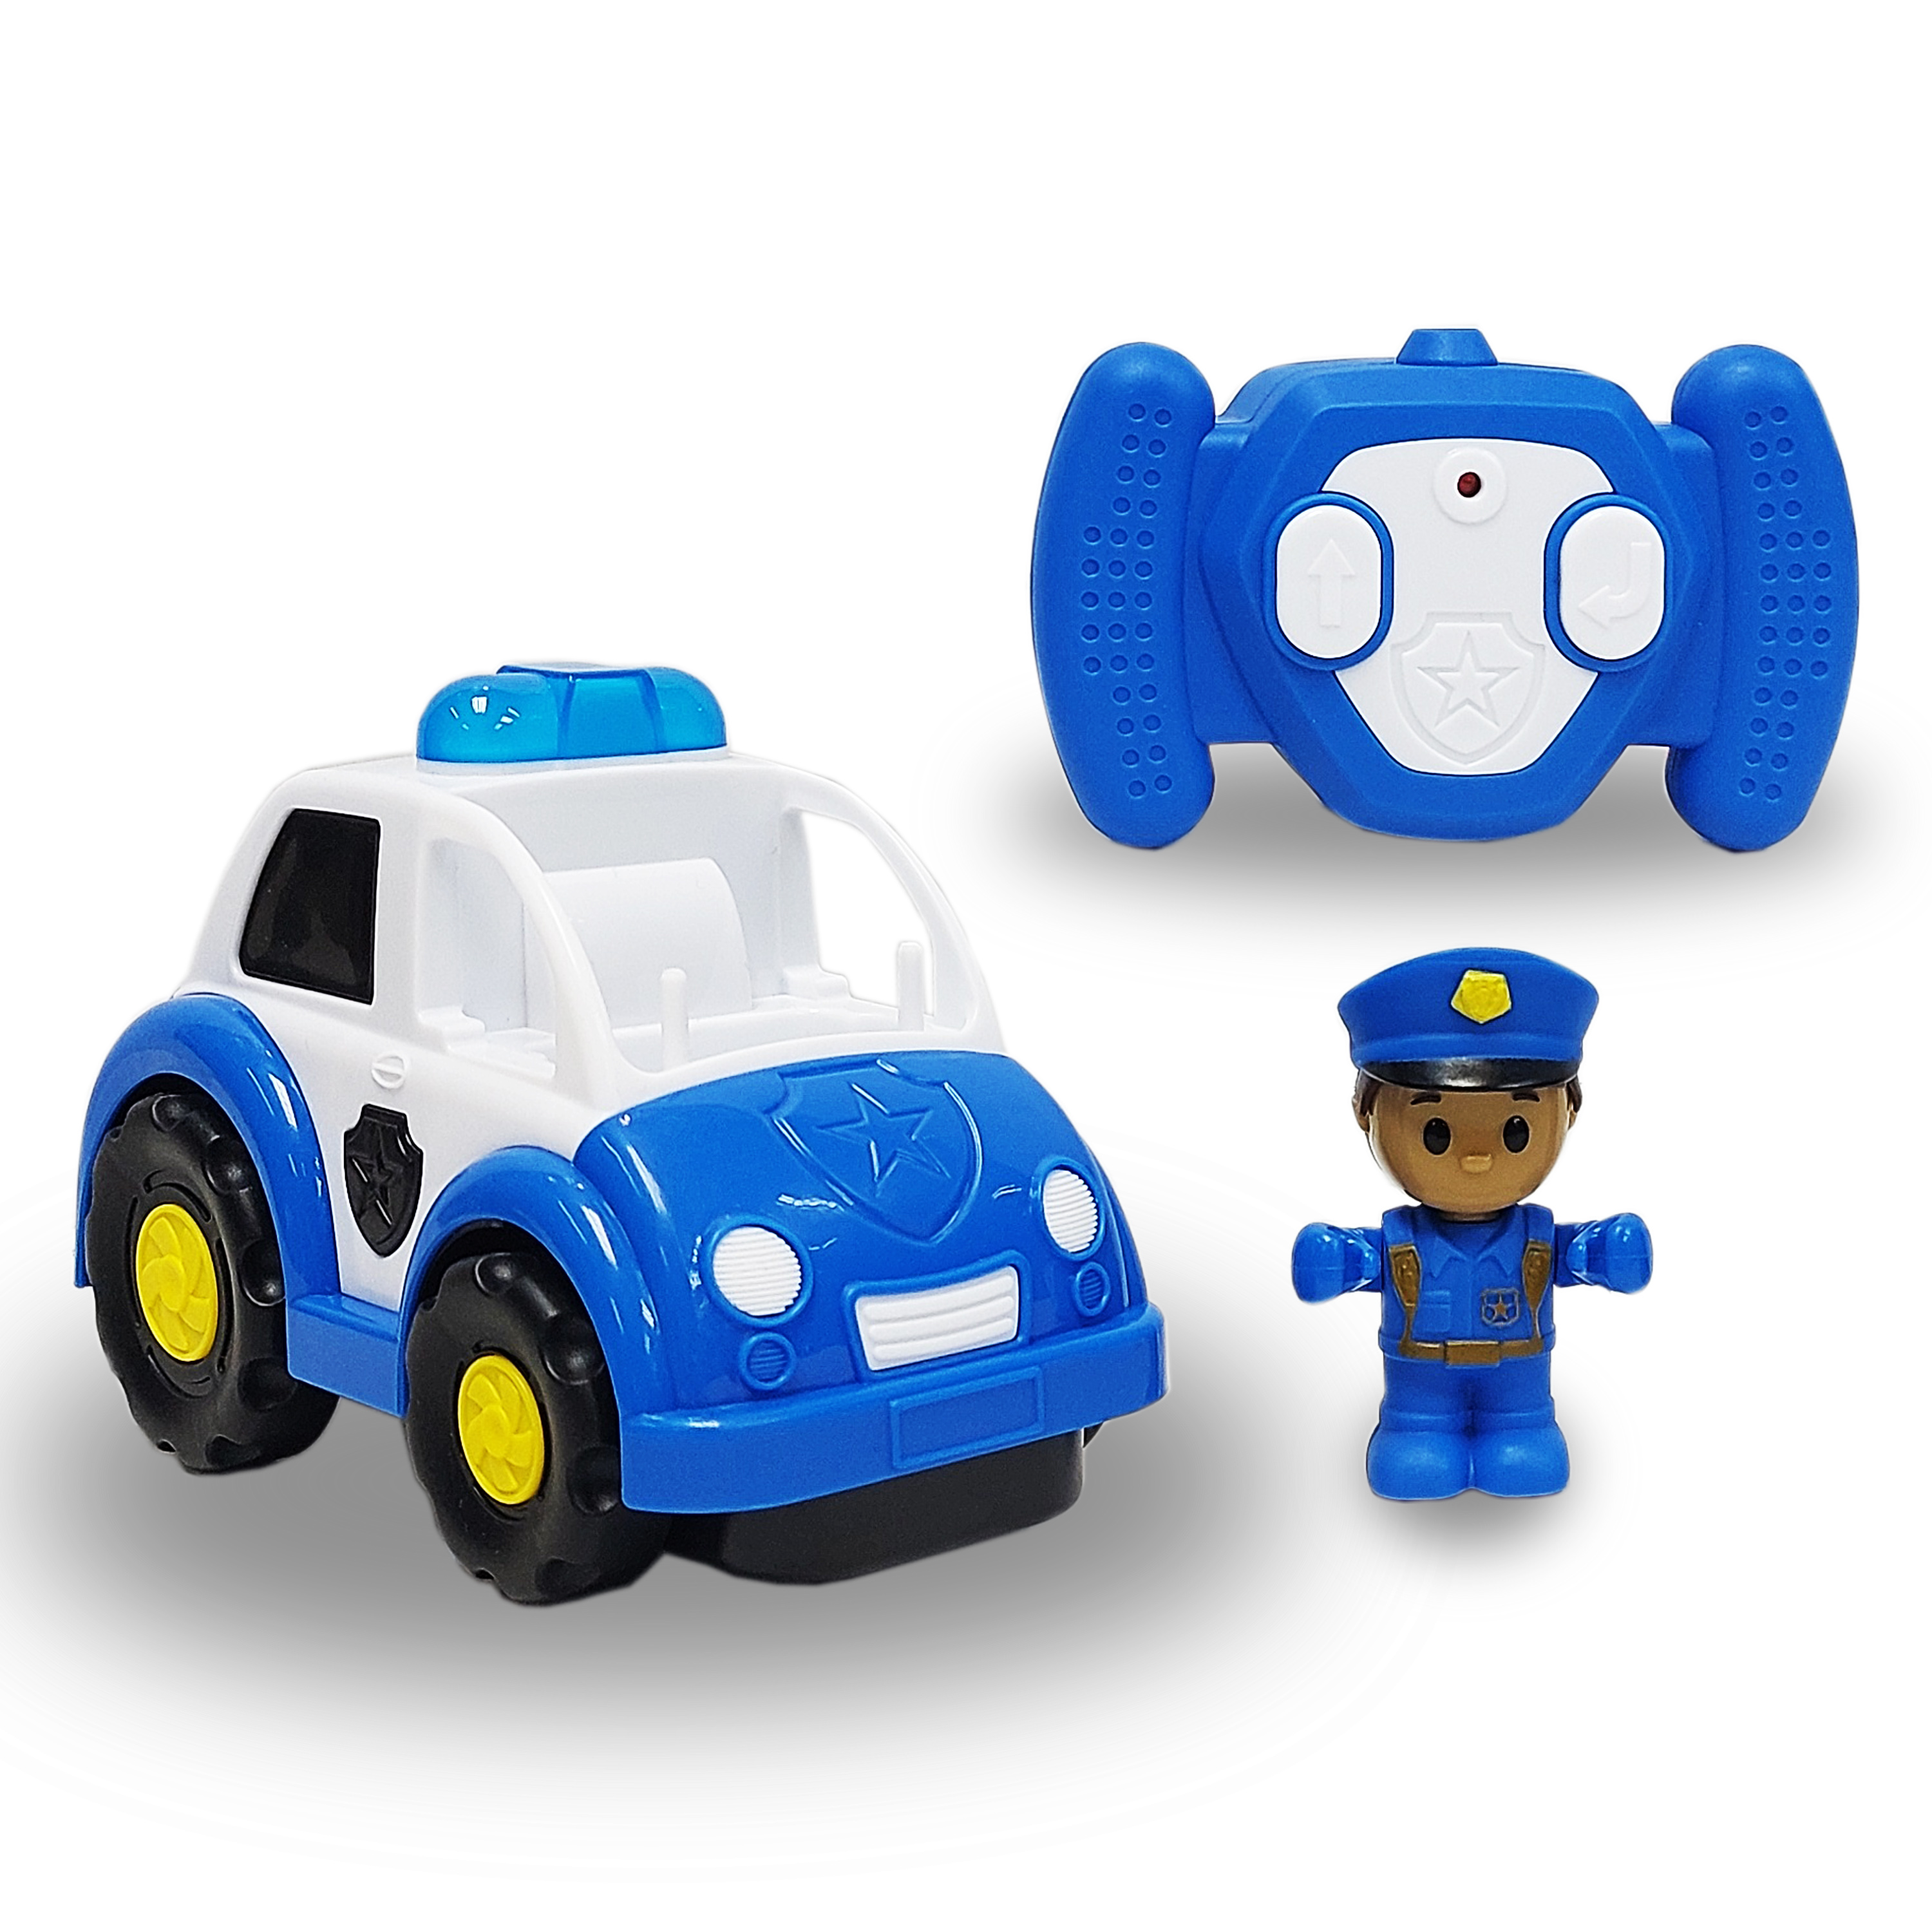 Kid Connection RC Police Car with Lights and Police Officer Figure, 2.4G, Ages 3+ - image 2 of 6